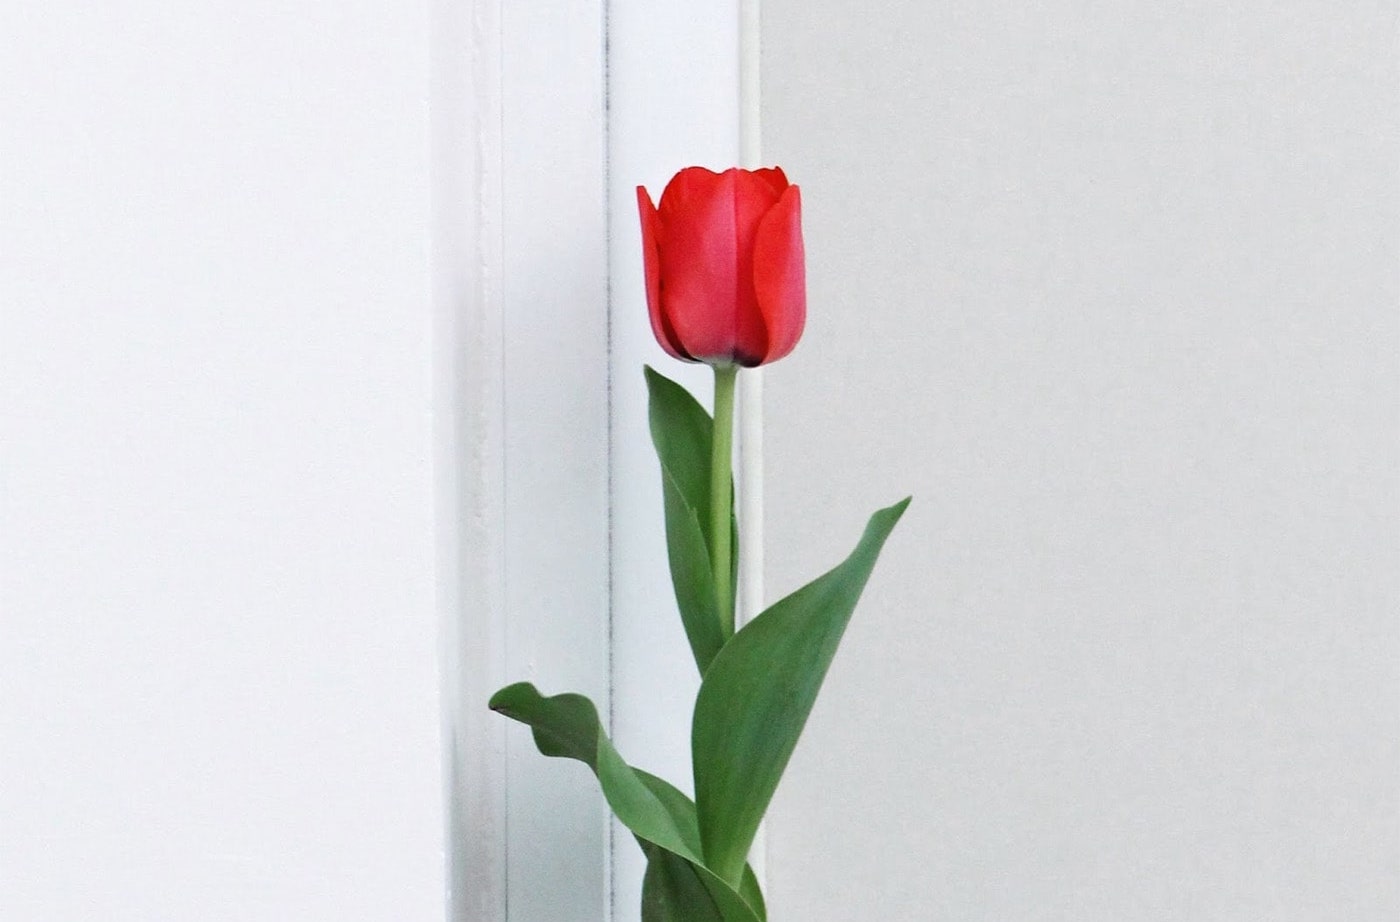 A pink tulip with three green leaves stands against a white wall.  